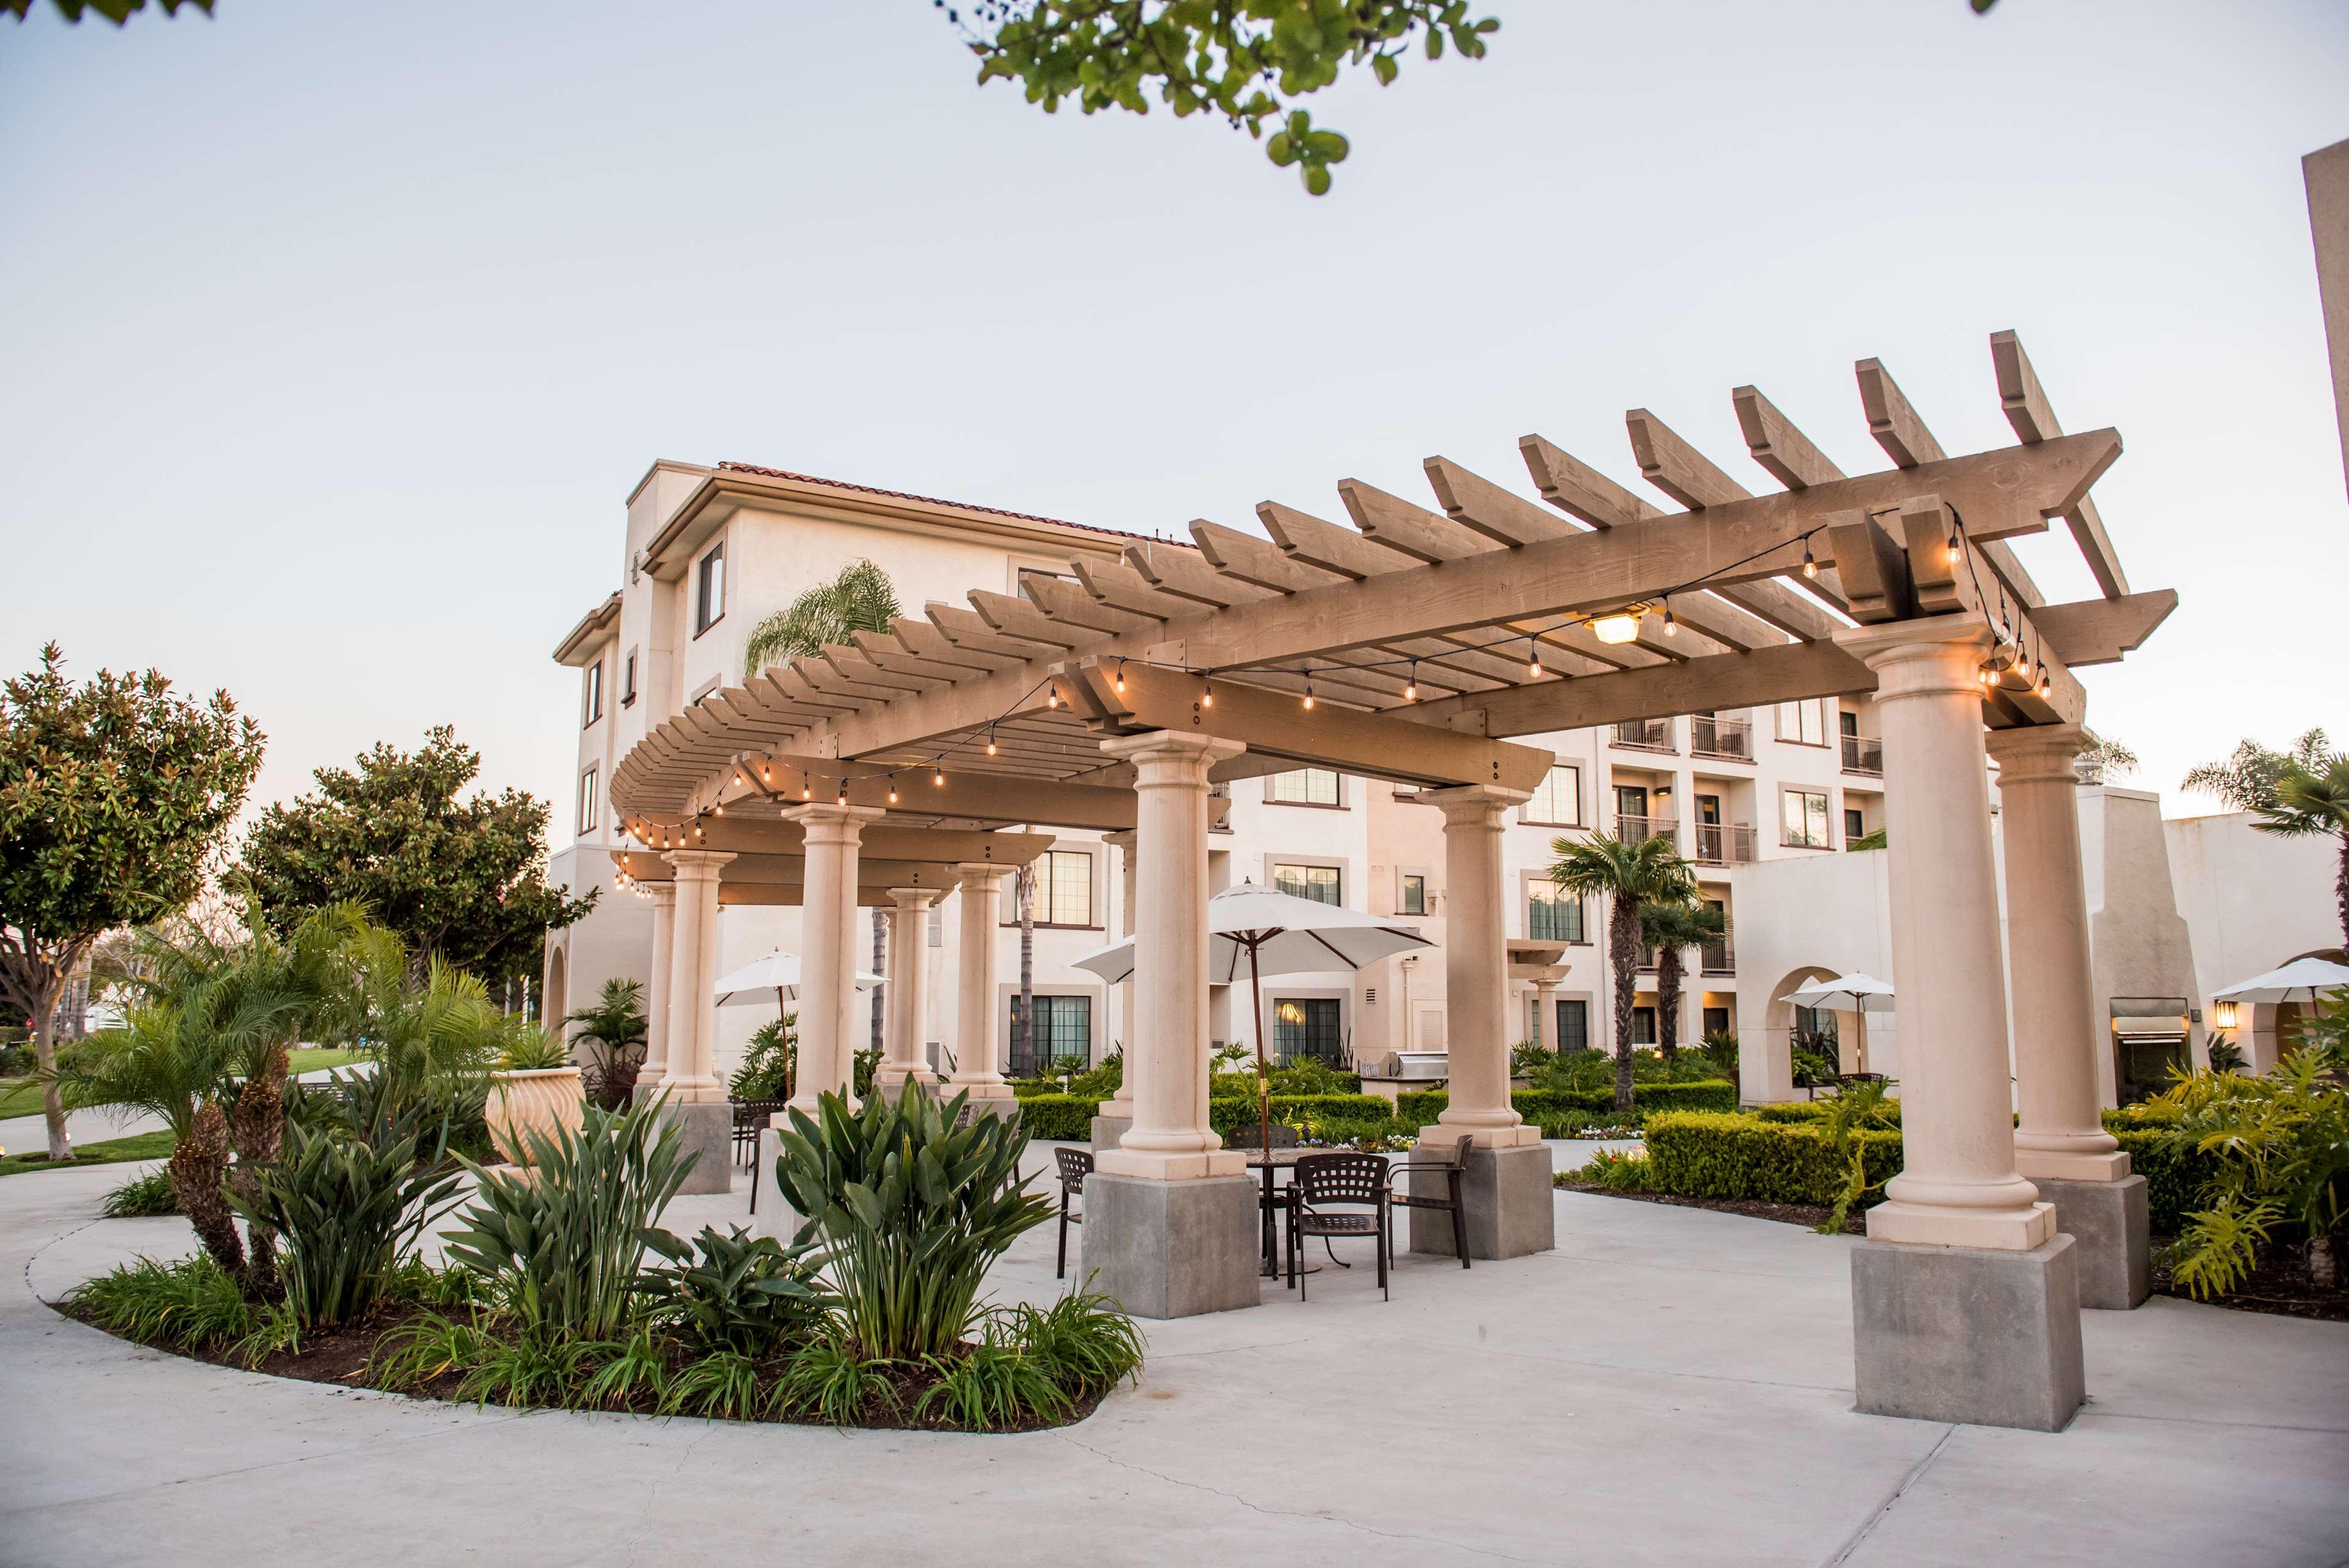 Homewood Suites by Hilton San Diego Airport-Liberty Station image